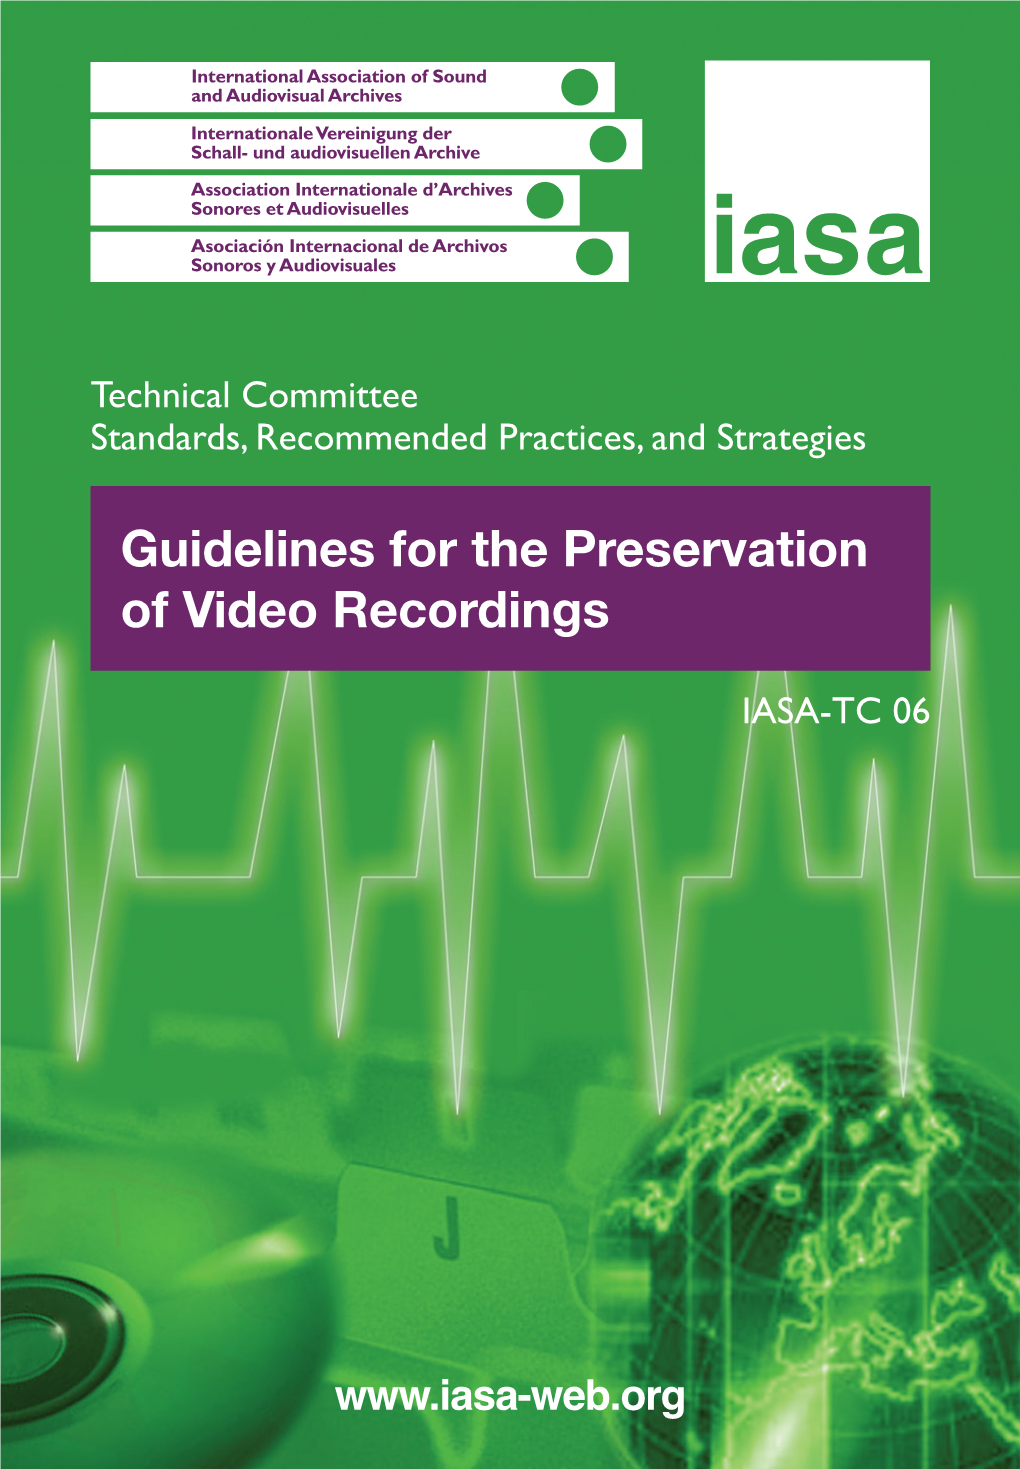 Guidelines for the Preservation of Video Recordings